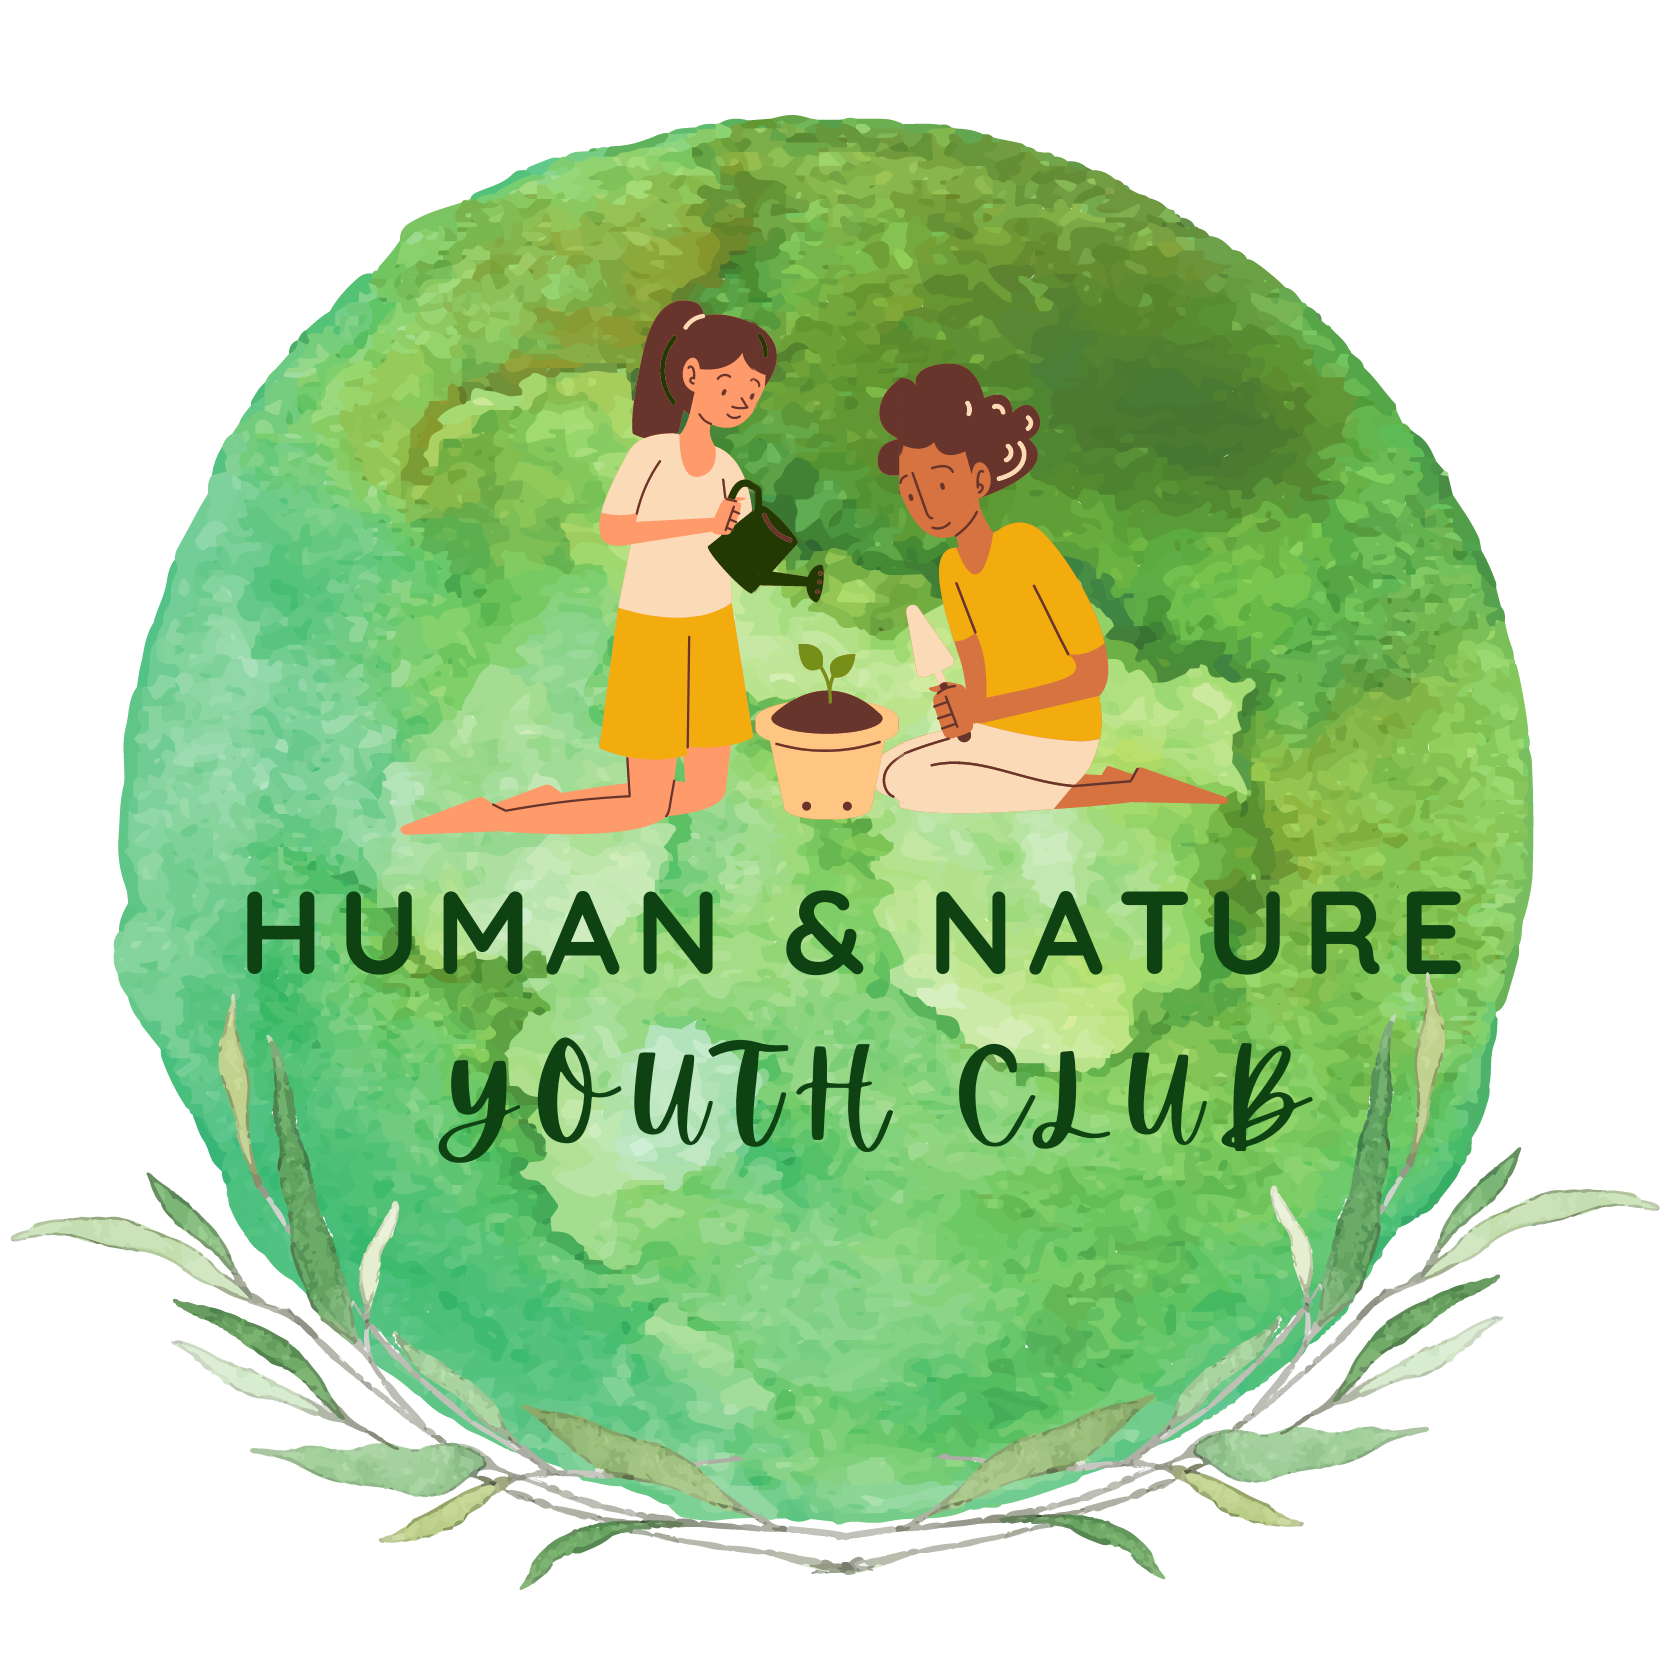 Human and Nature Youth Club